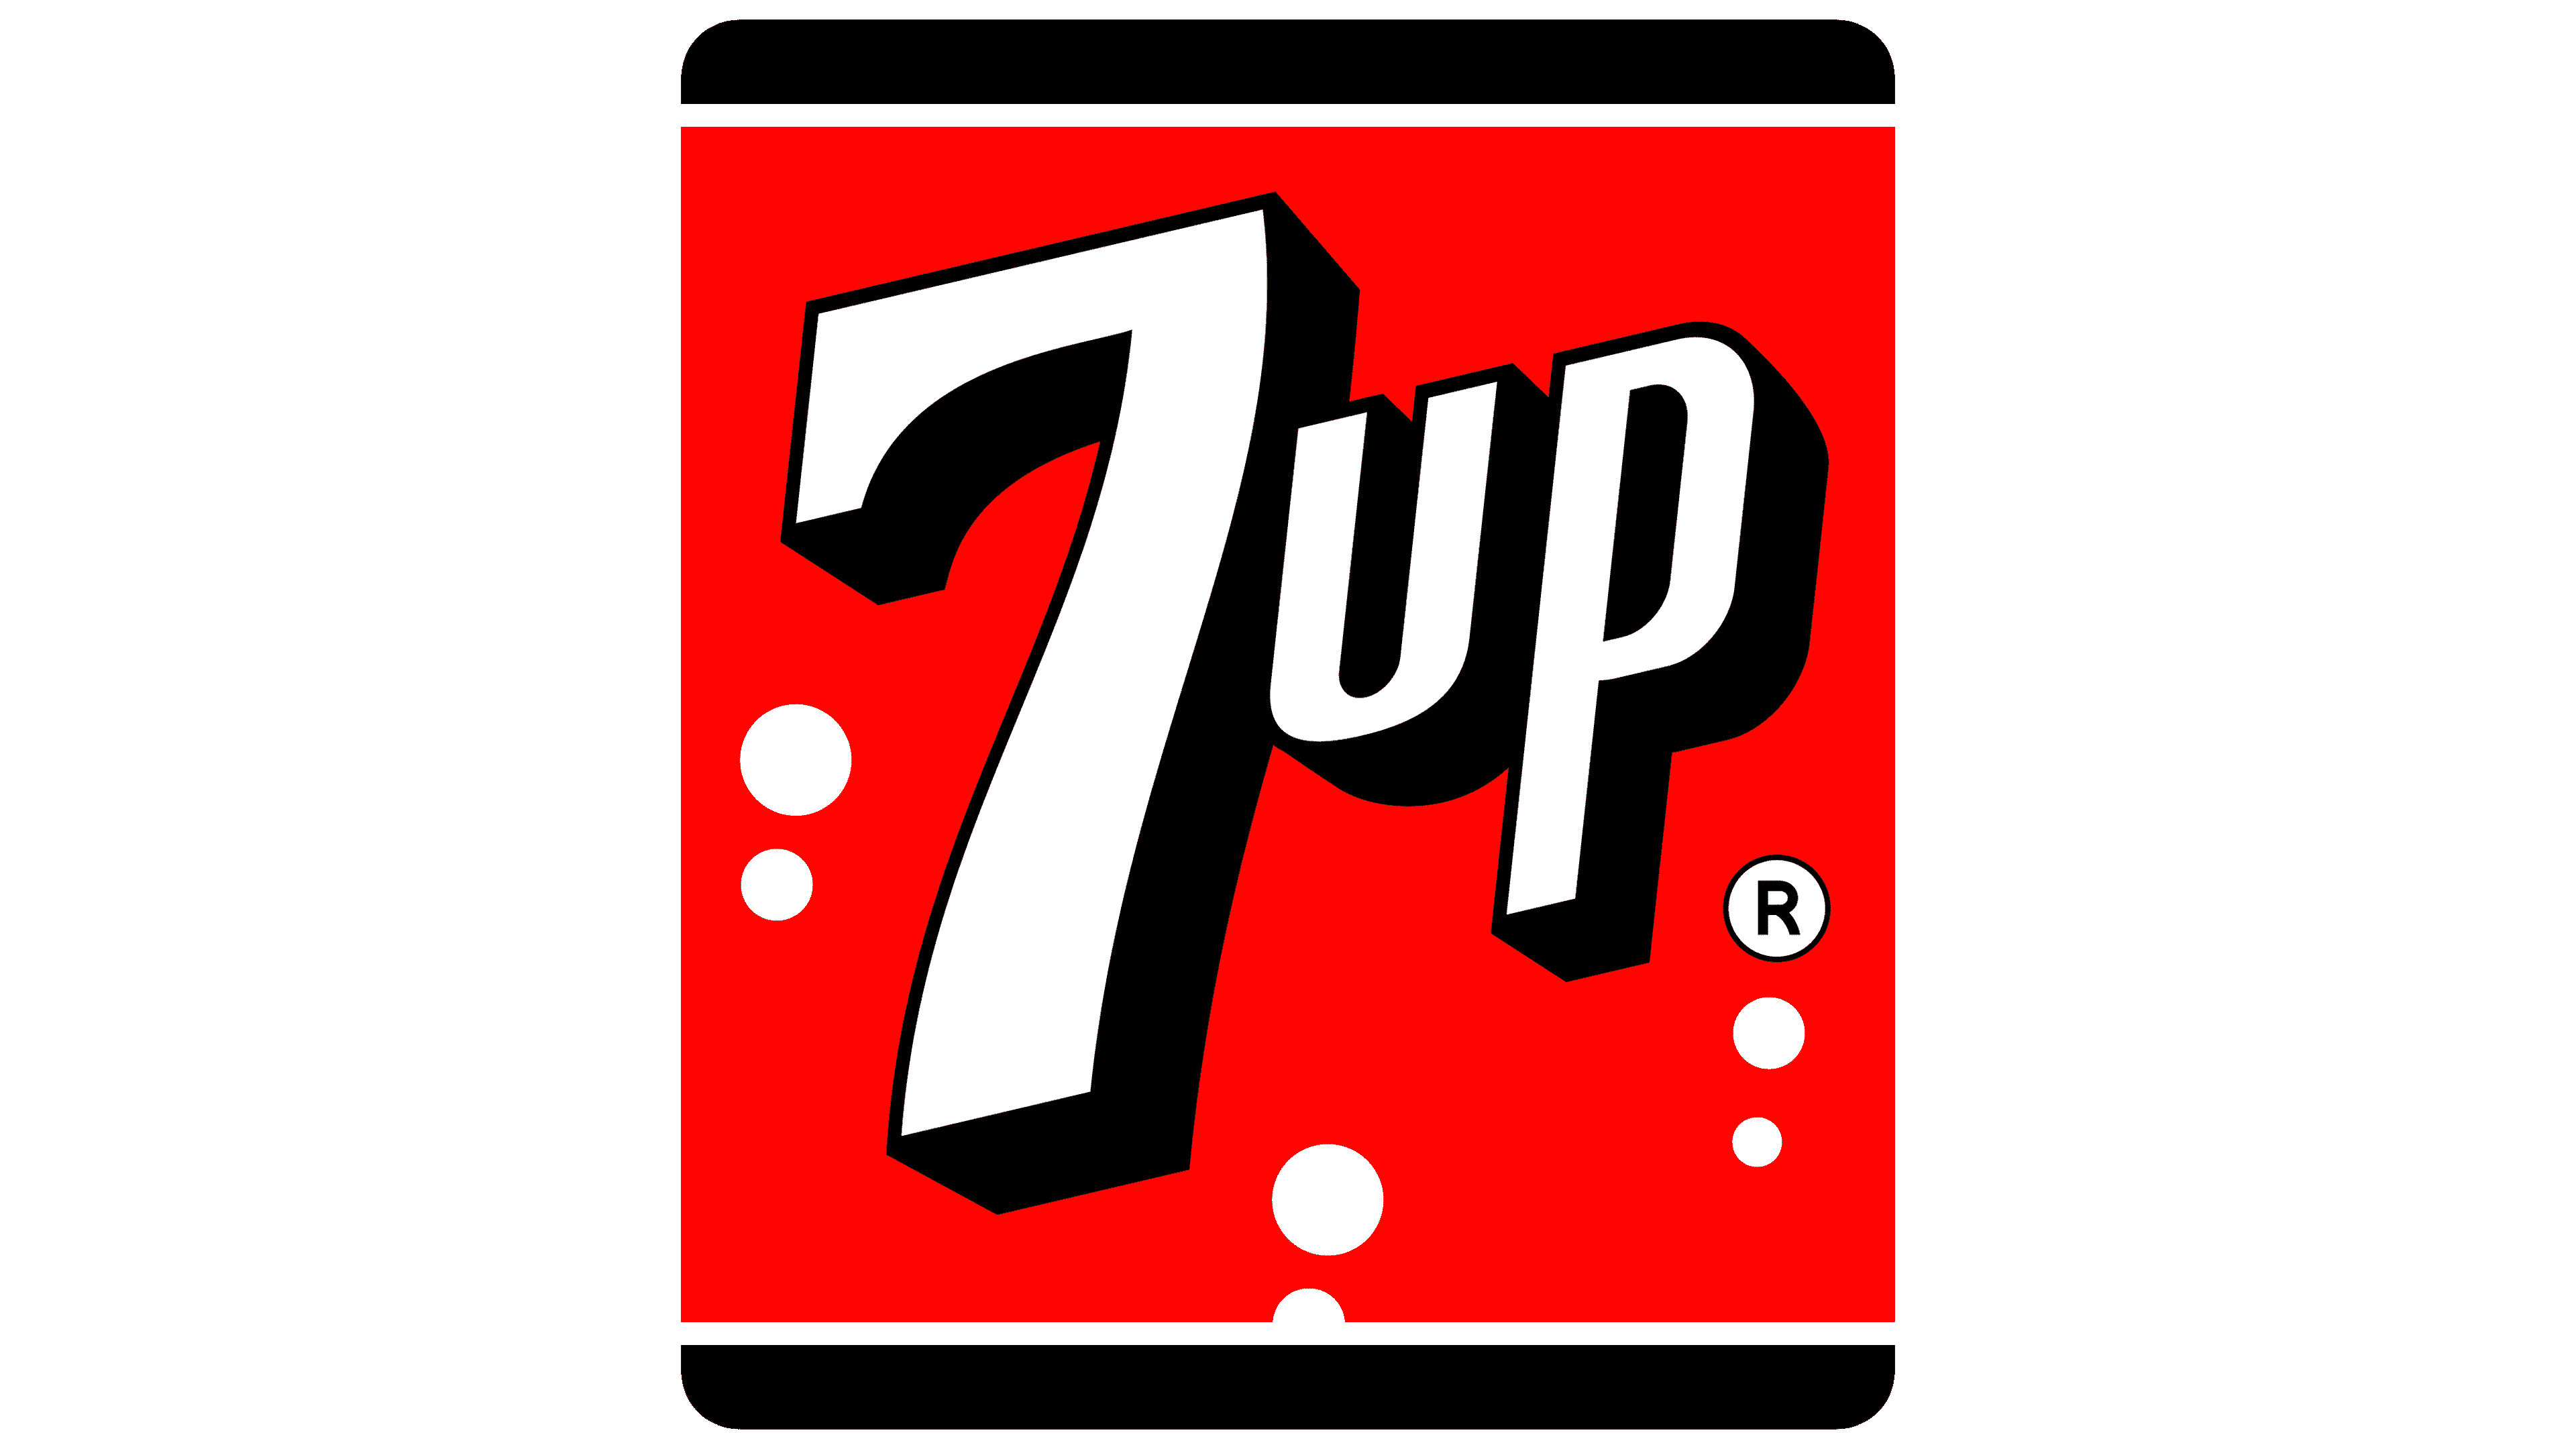 7up Logo, symbol, meaning, history, PNG, brand